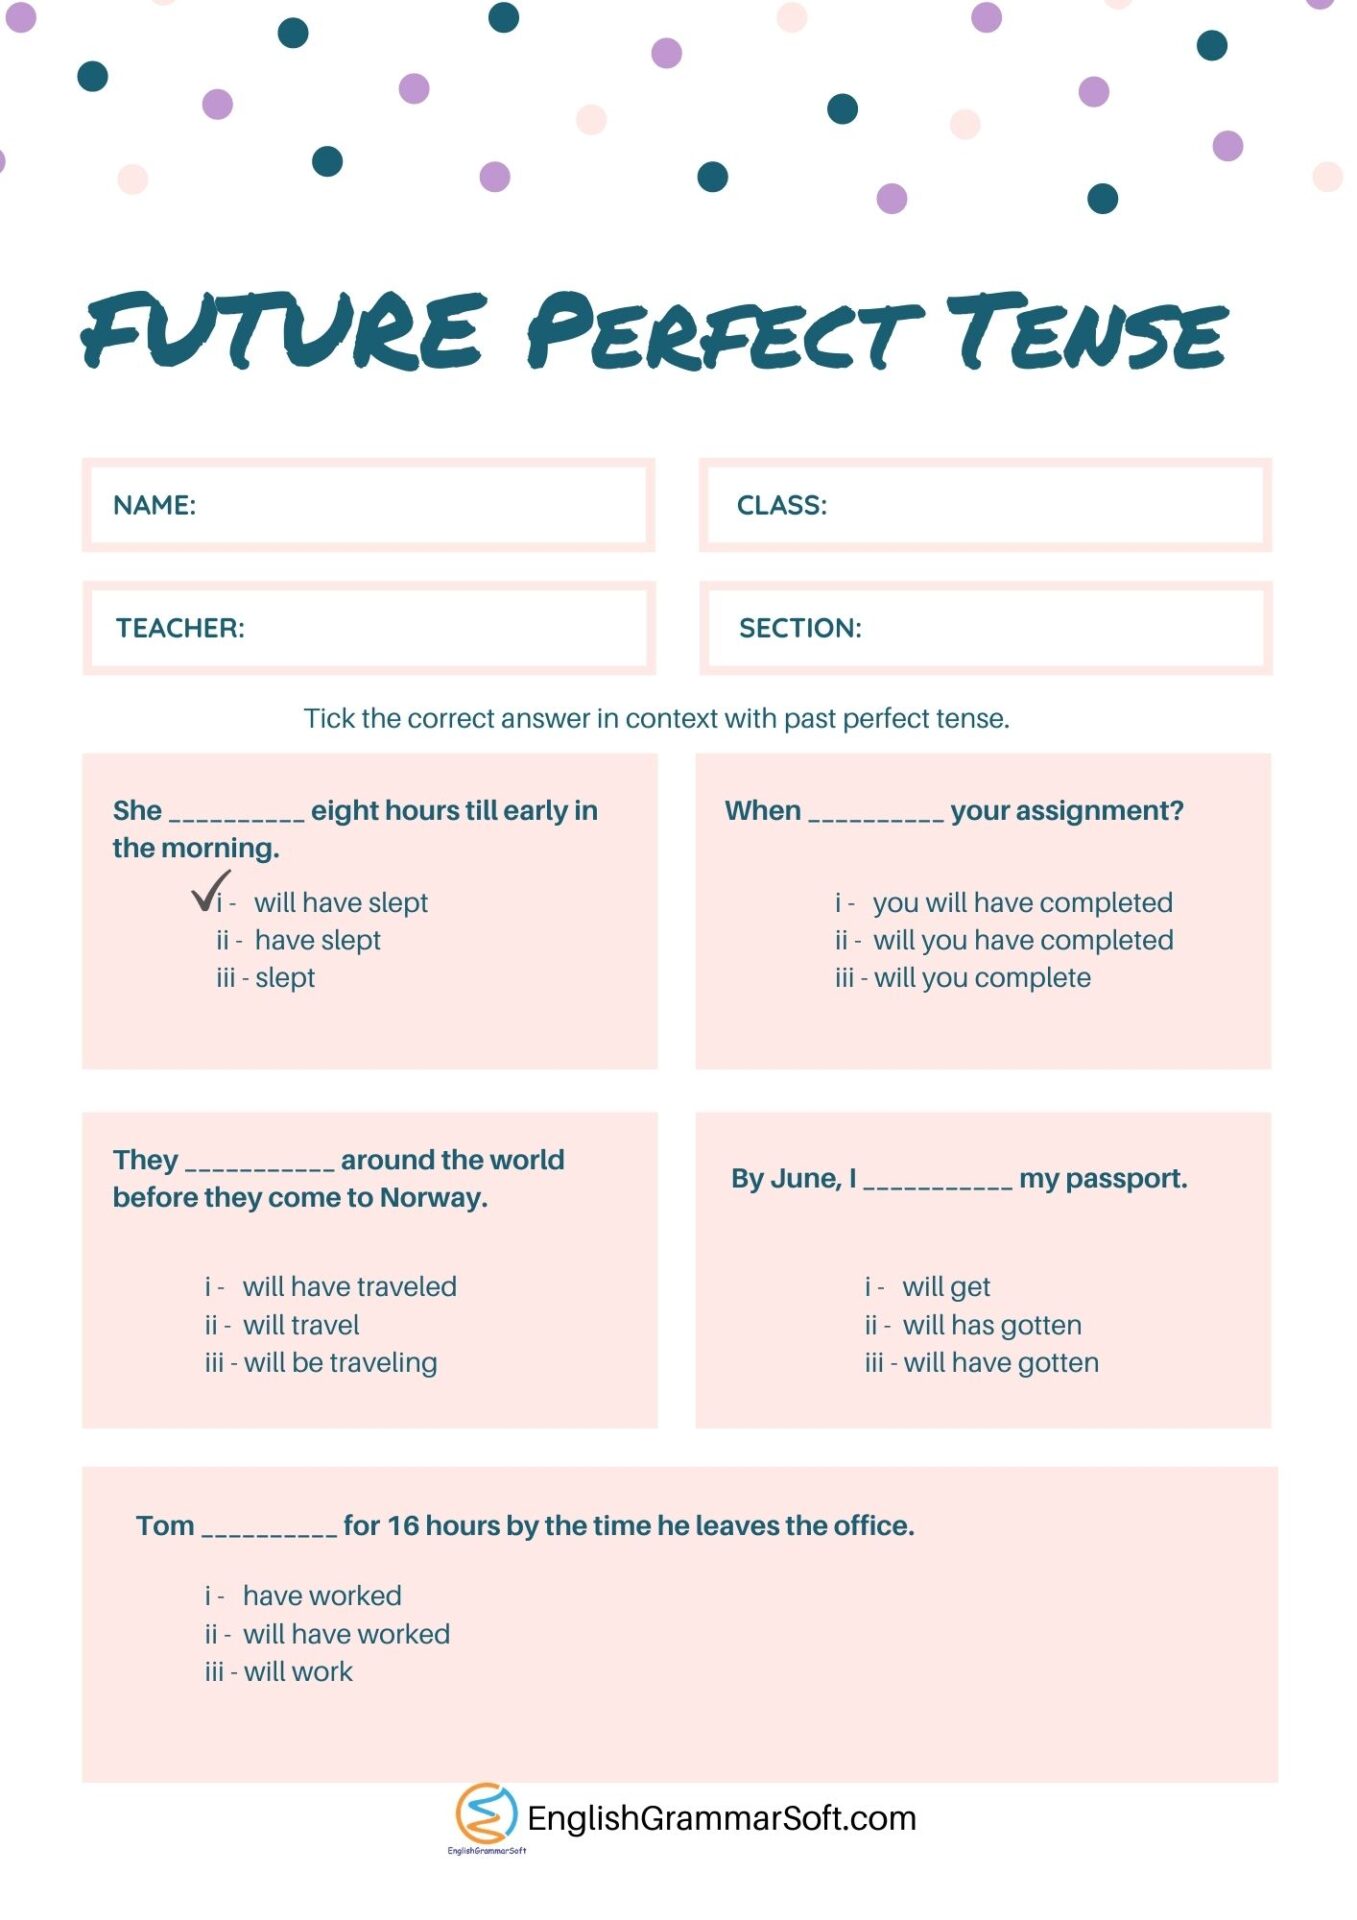 Worksheets on Future Perfect Tense with answers